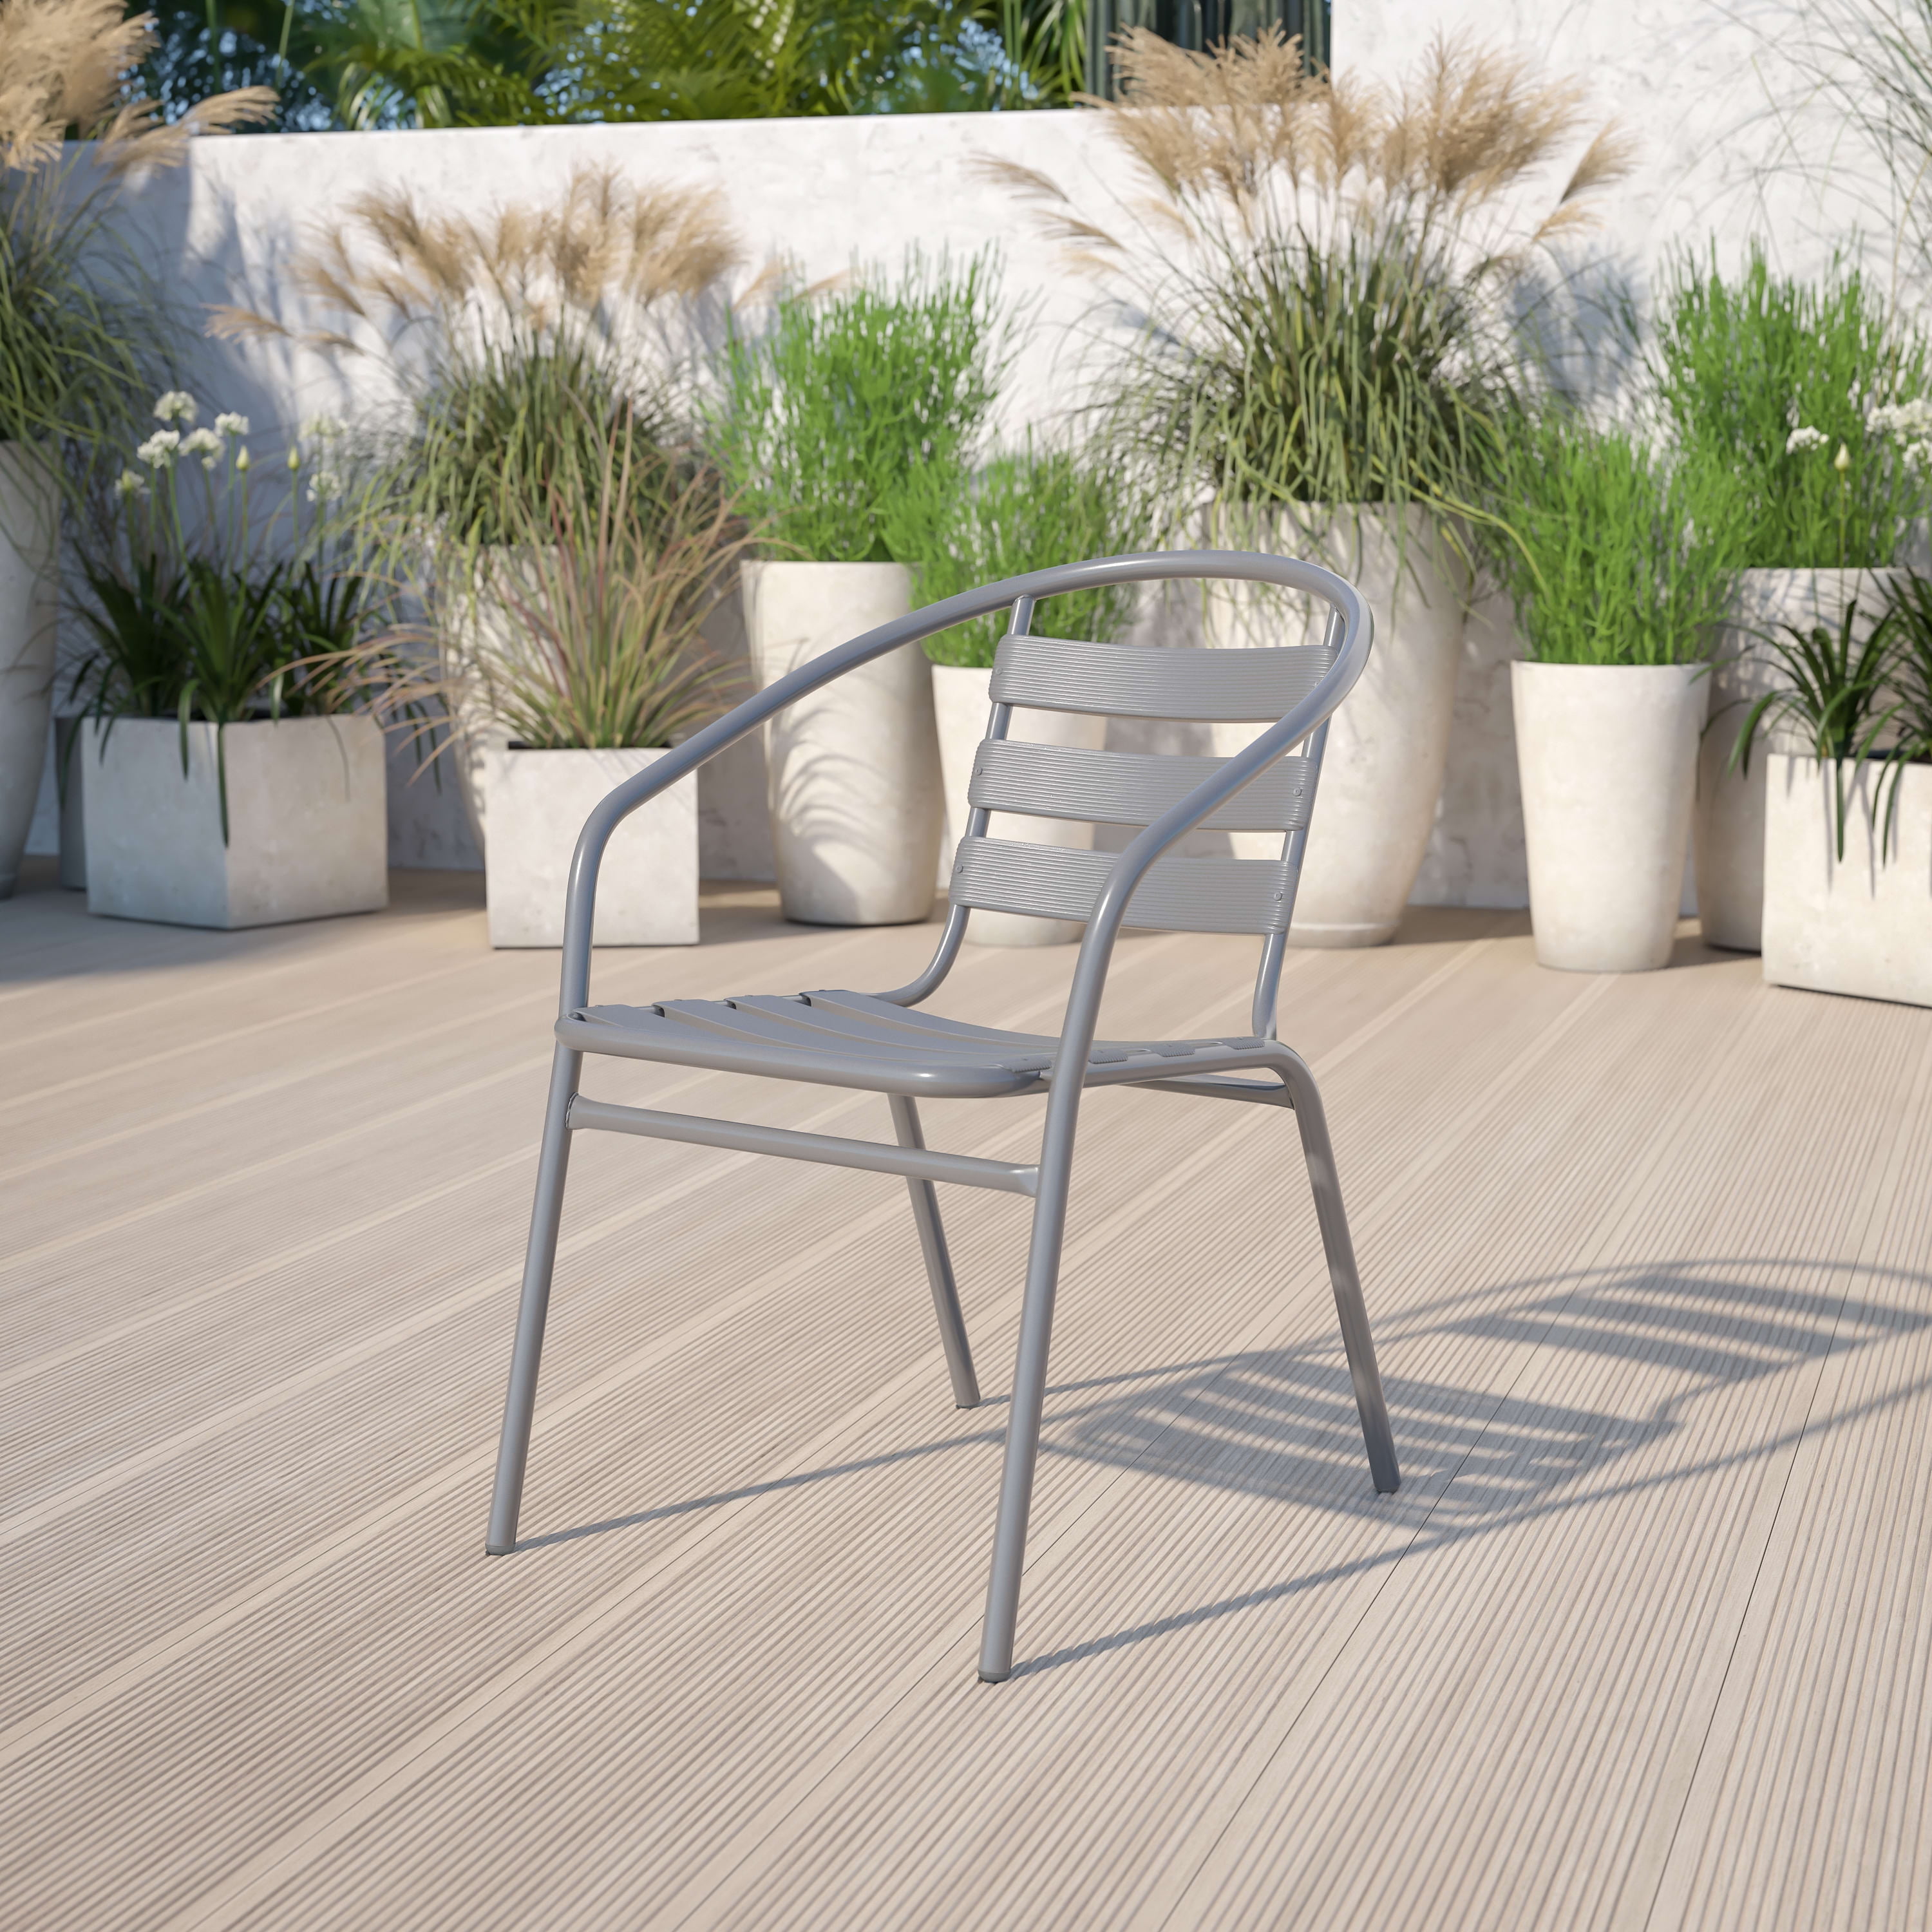 Commercial Quality Details about   Indoor-Outdoor Aluminum Restaurant Stack Chair w/ Wood Seat 